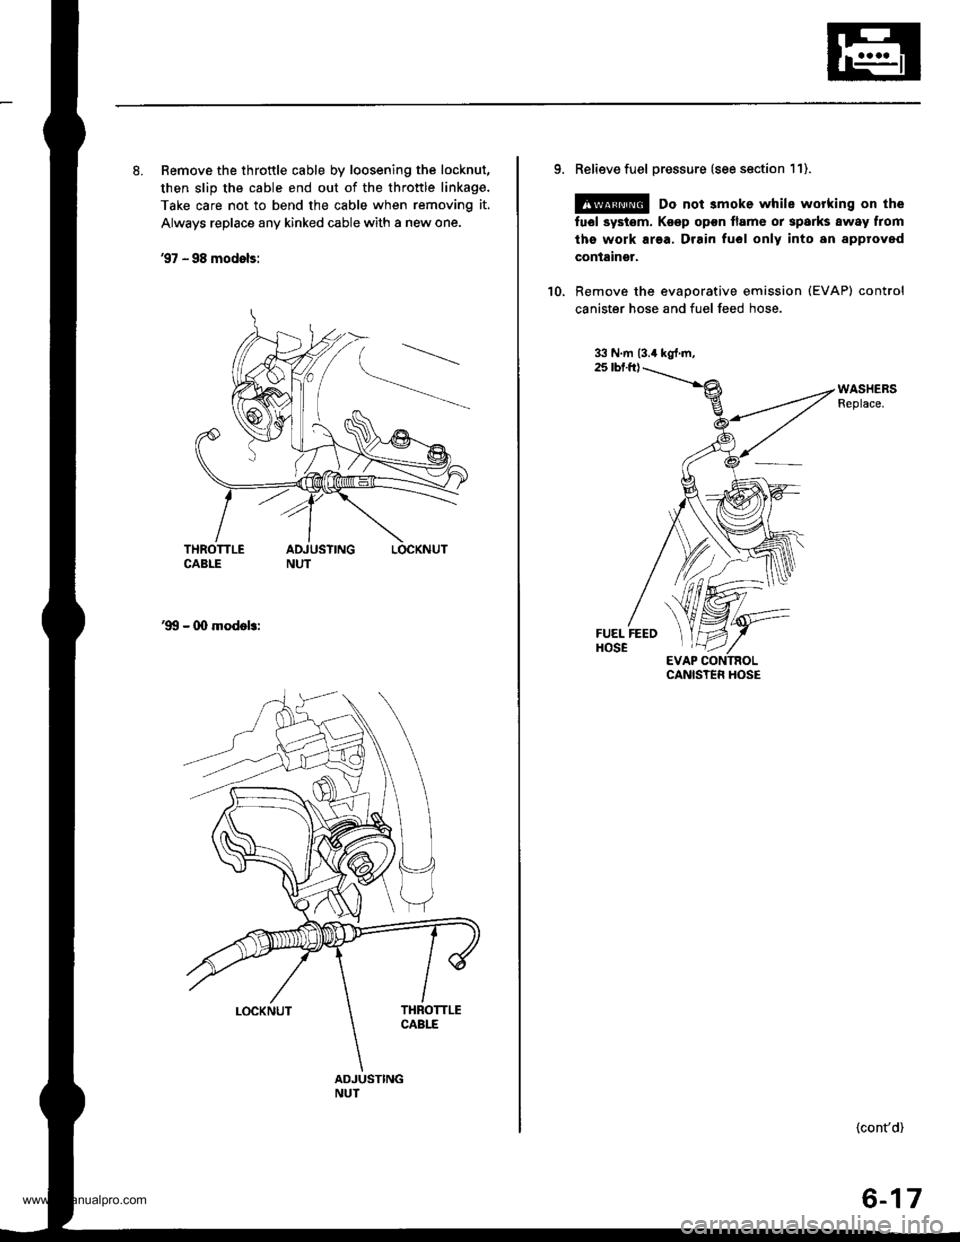 HONDA CR-V 1999 RD1-RD3 / 1.G Workshop Manual 
8. Remove the throttle cable by loosening the locknut,
then slip the cable end out of the throttle linkage.
Take care not to bend the cable when removing it.
Always replace any kinked cable with a ne